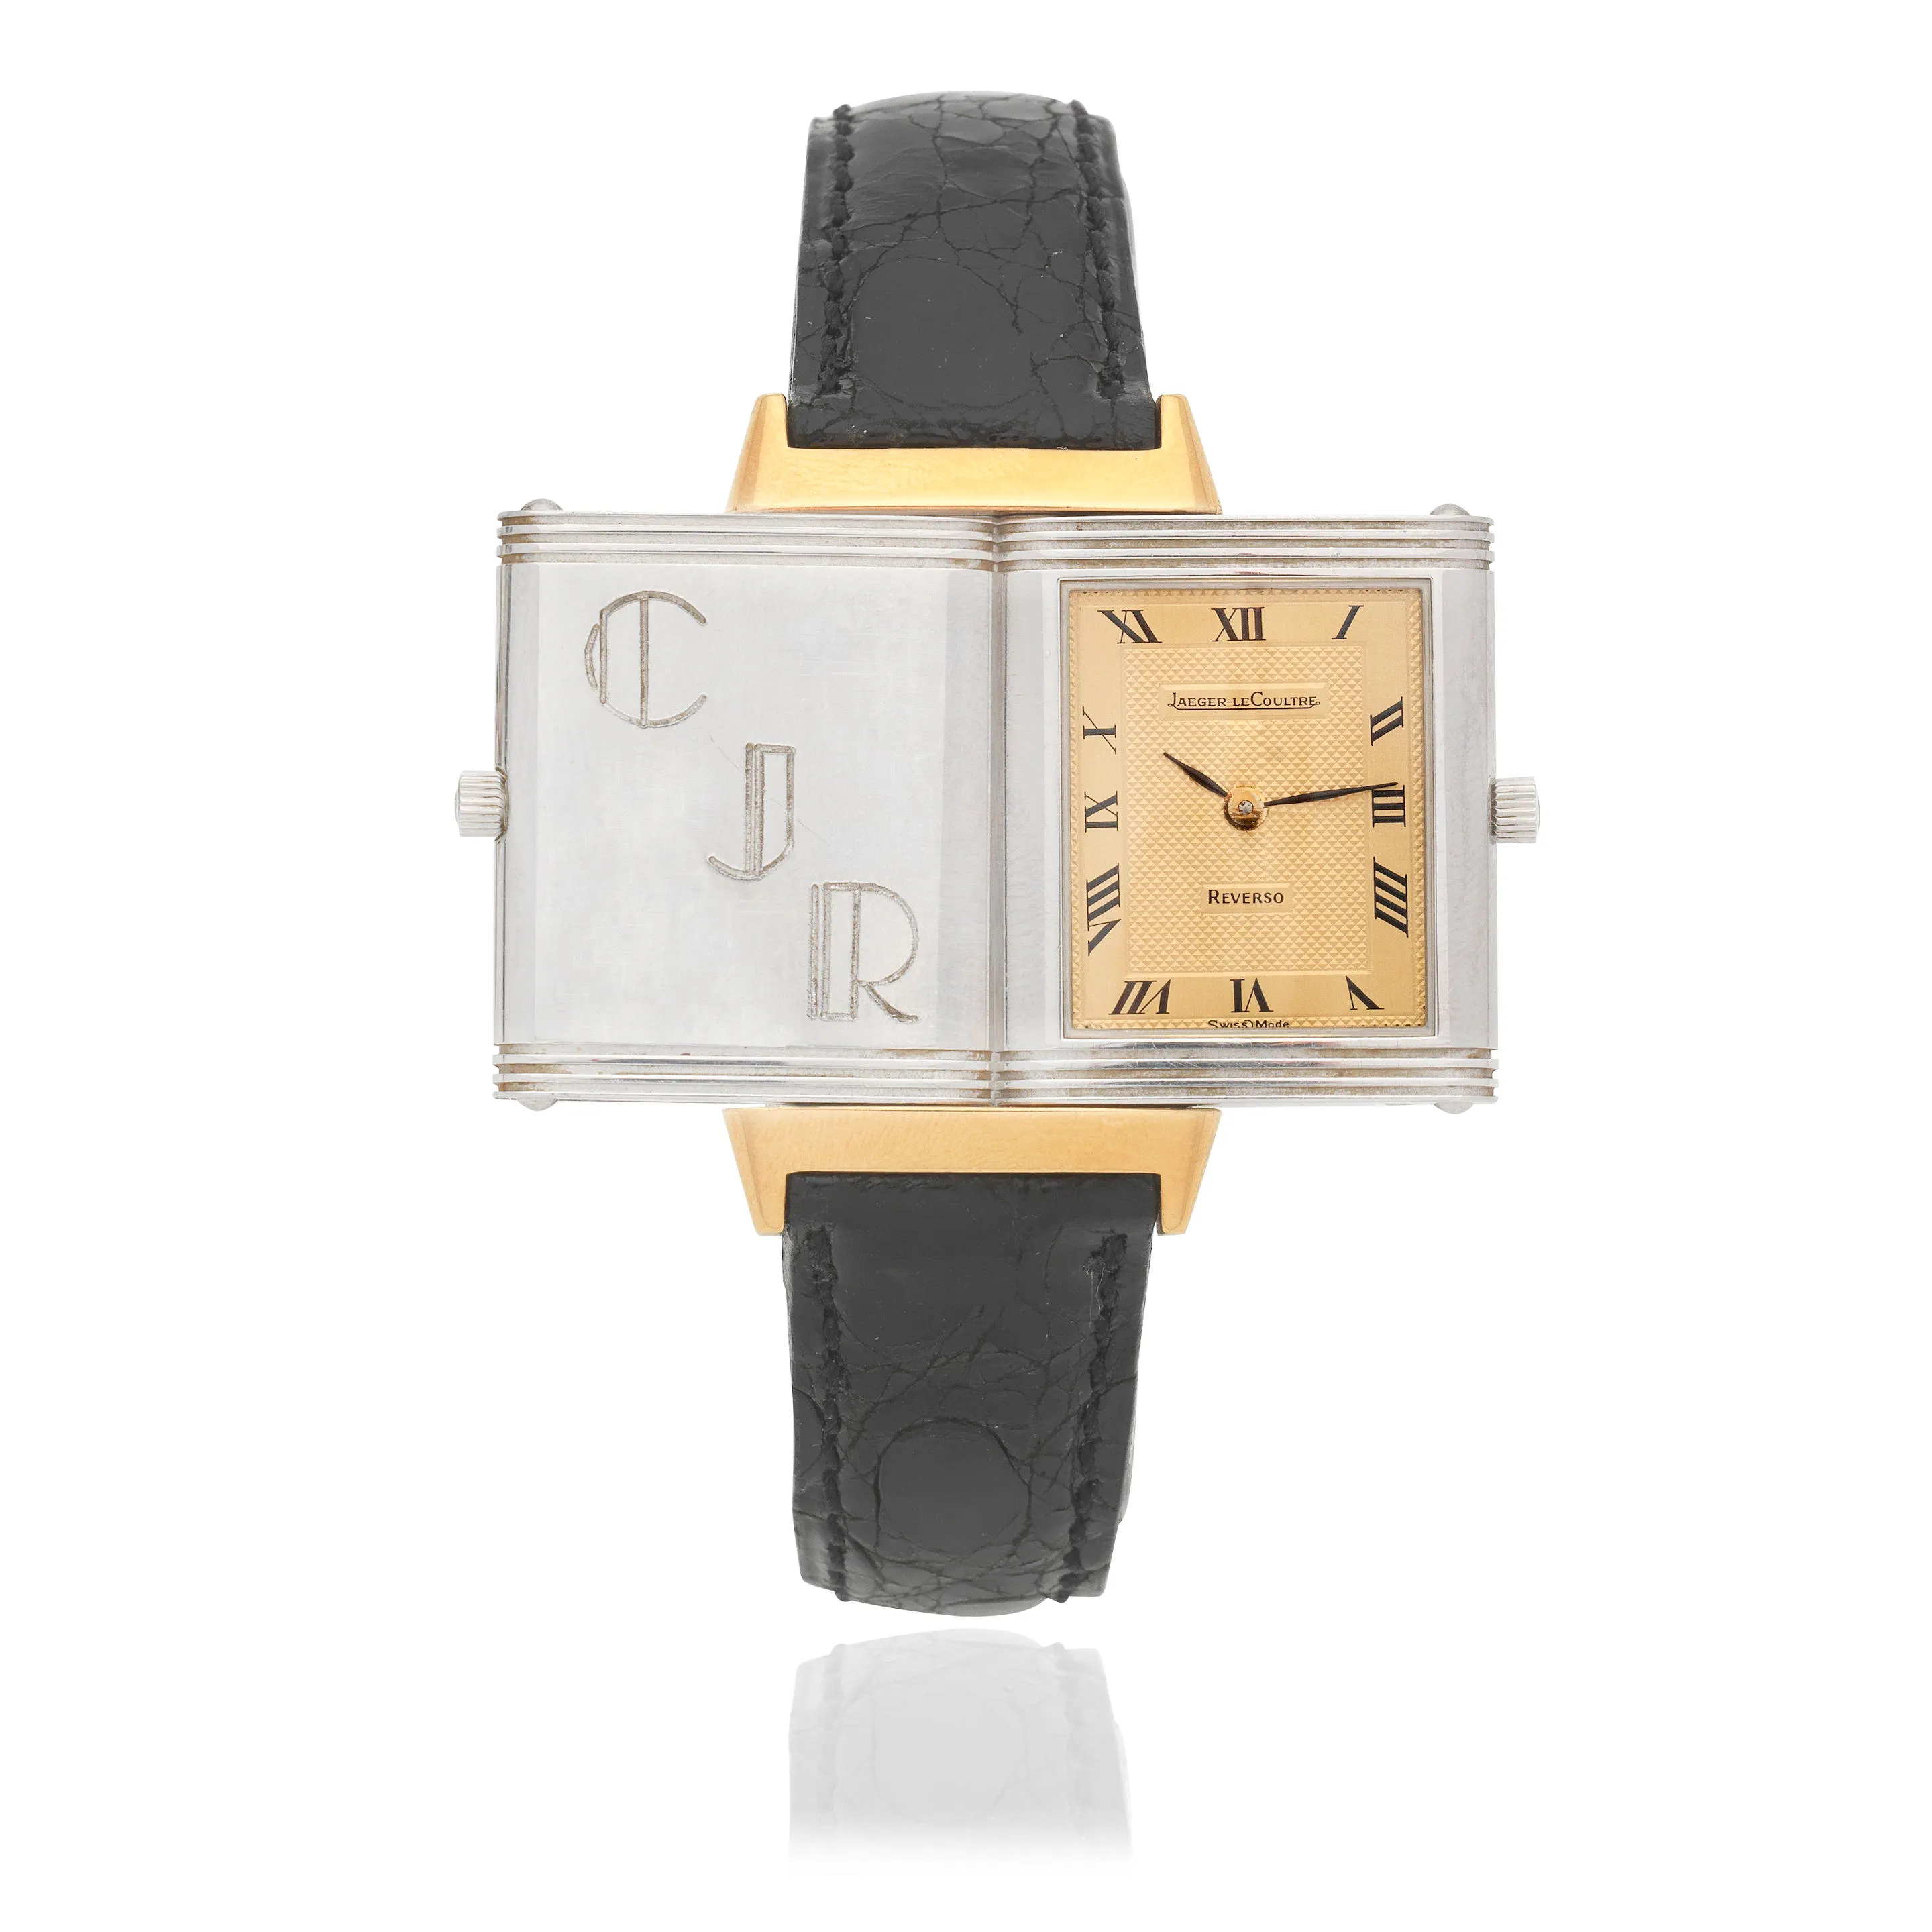 Jaeger-LeCoultre Reverso 140.251.5 23mm Stainless steel Champagne